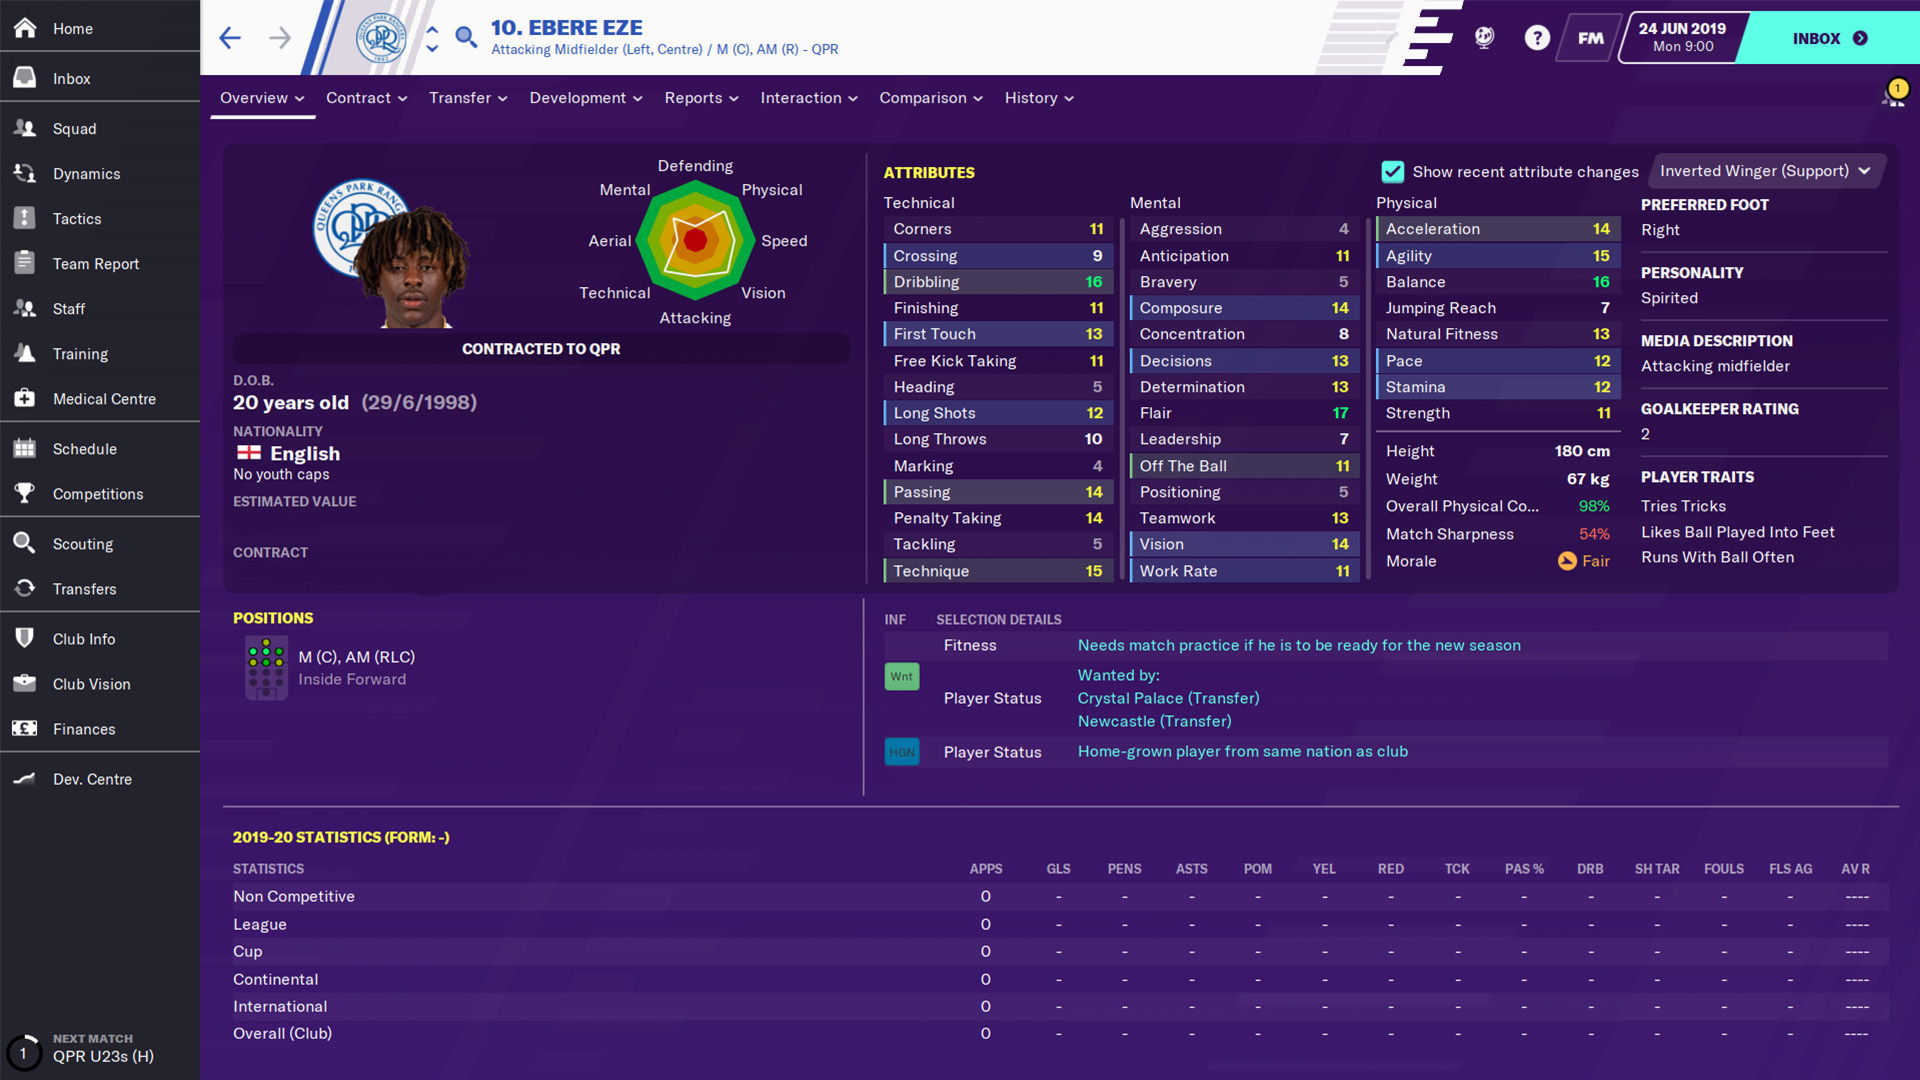 Ebere Eze's profile in Football Manager 2020